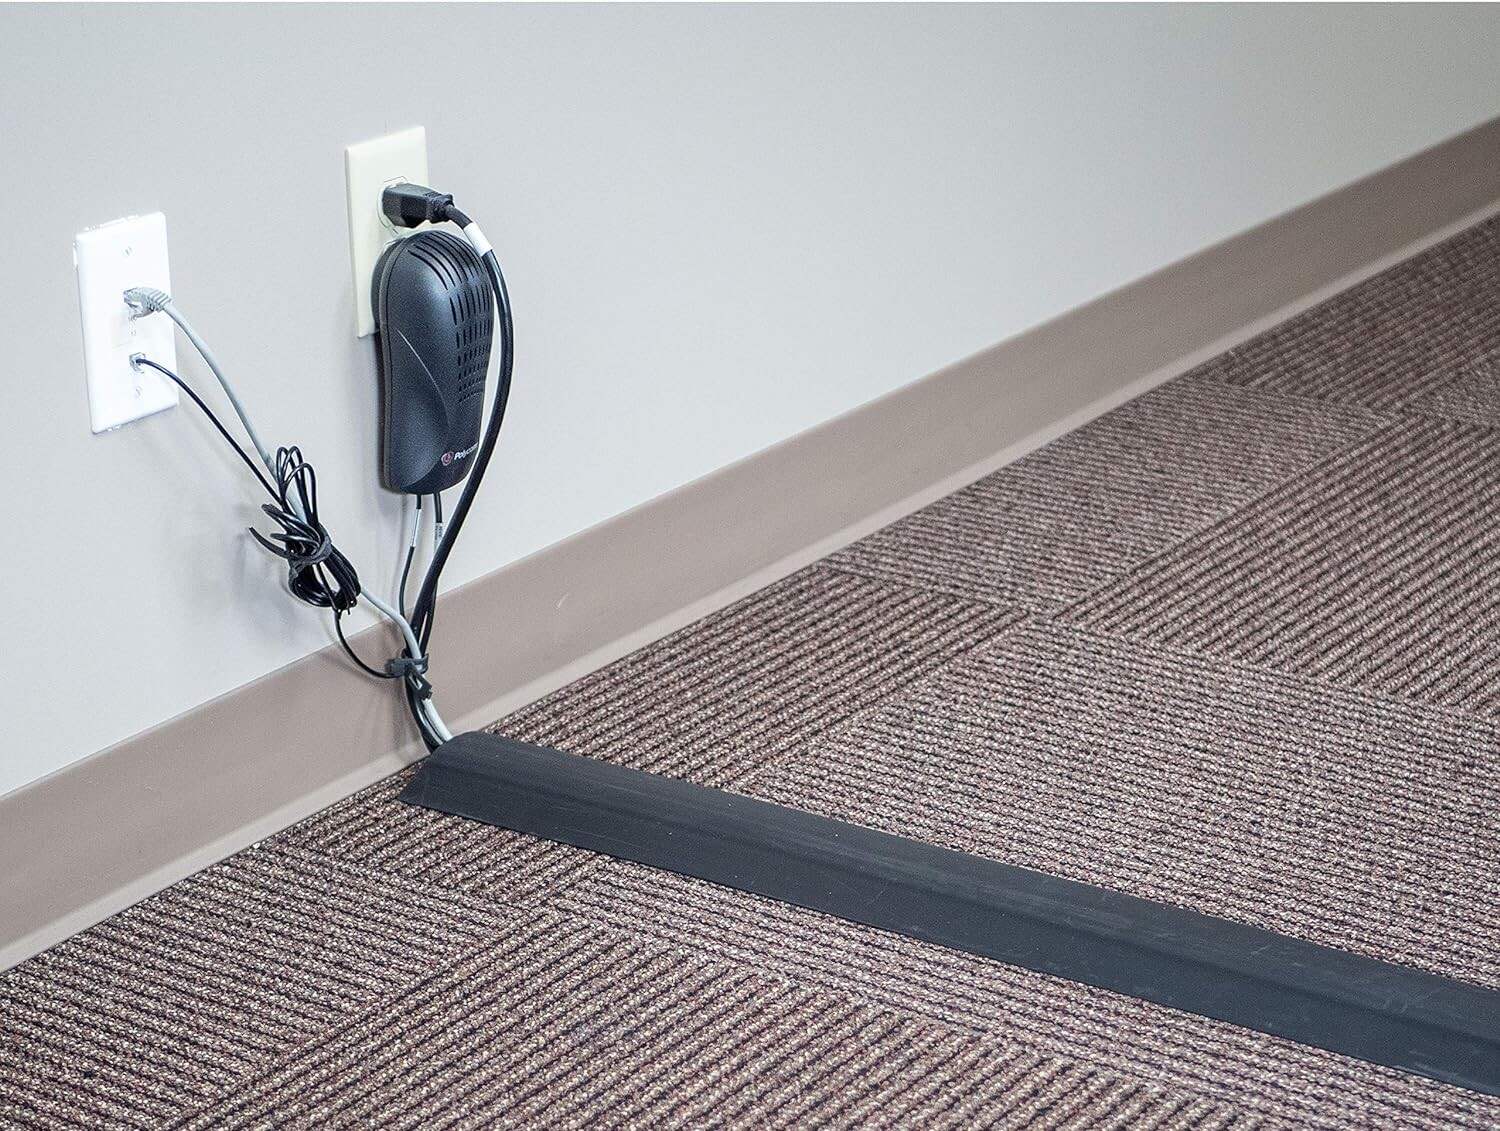 https://storables.com/wp-content/uploads/2023/09/10-amazing-extension-cord-covers-for-floor-for-2023-1694441948.jpg